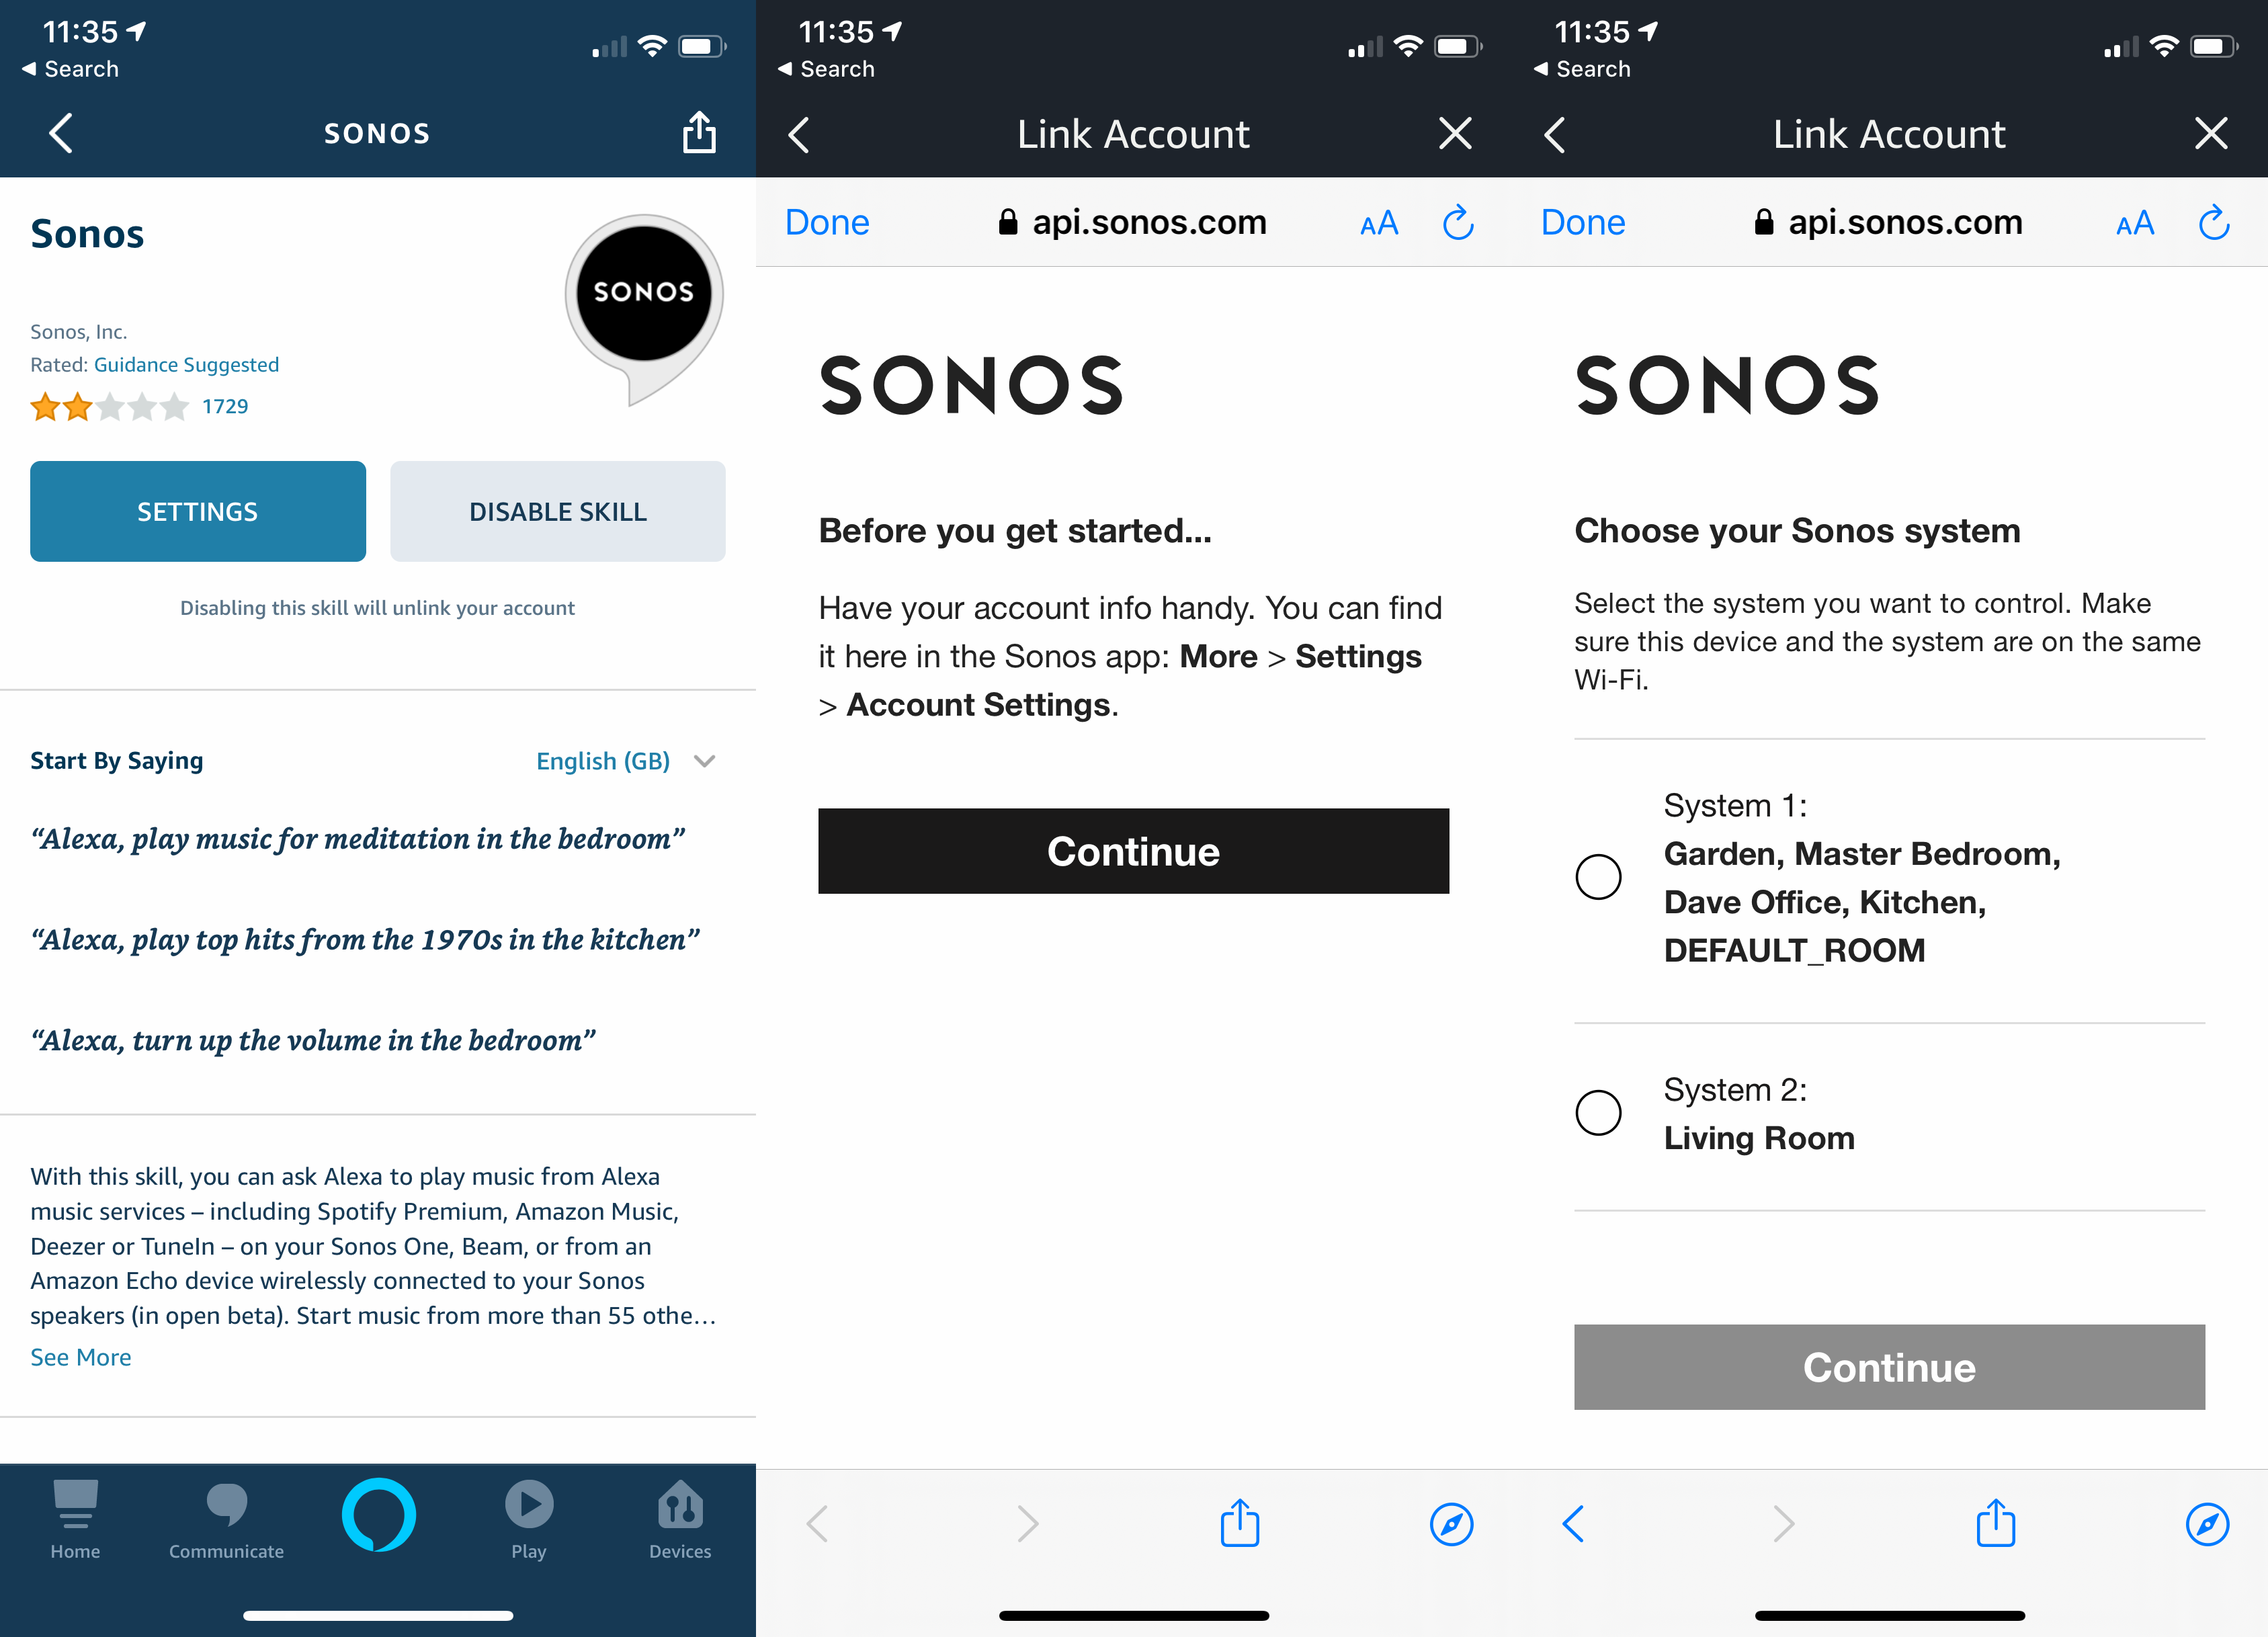 Connect Alexa to SonosScreenshots from Sonos about linking Alexa to Sonos